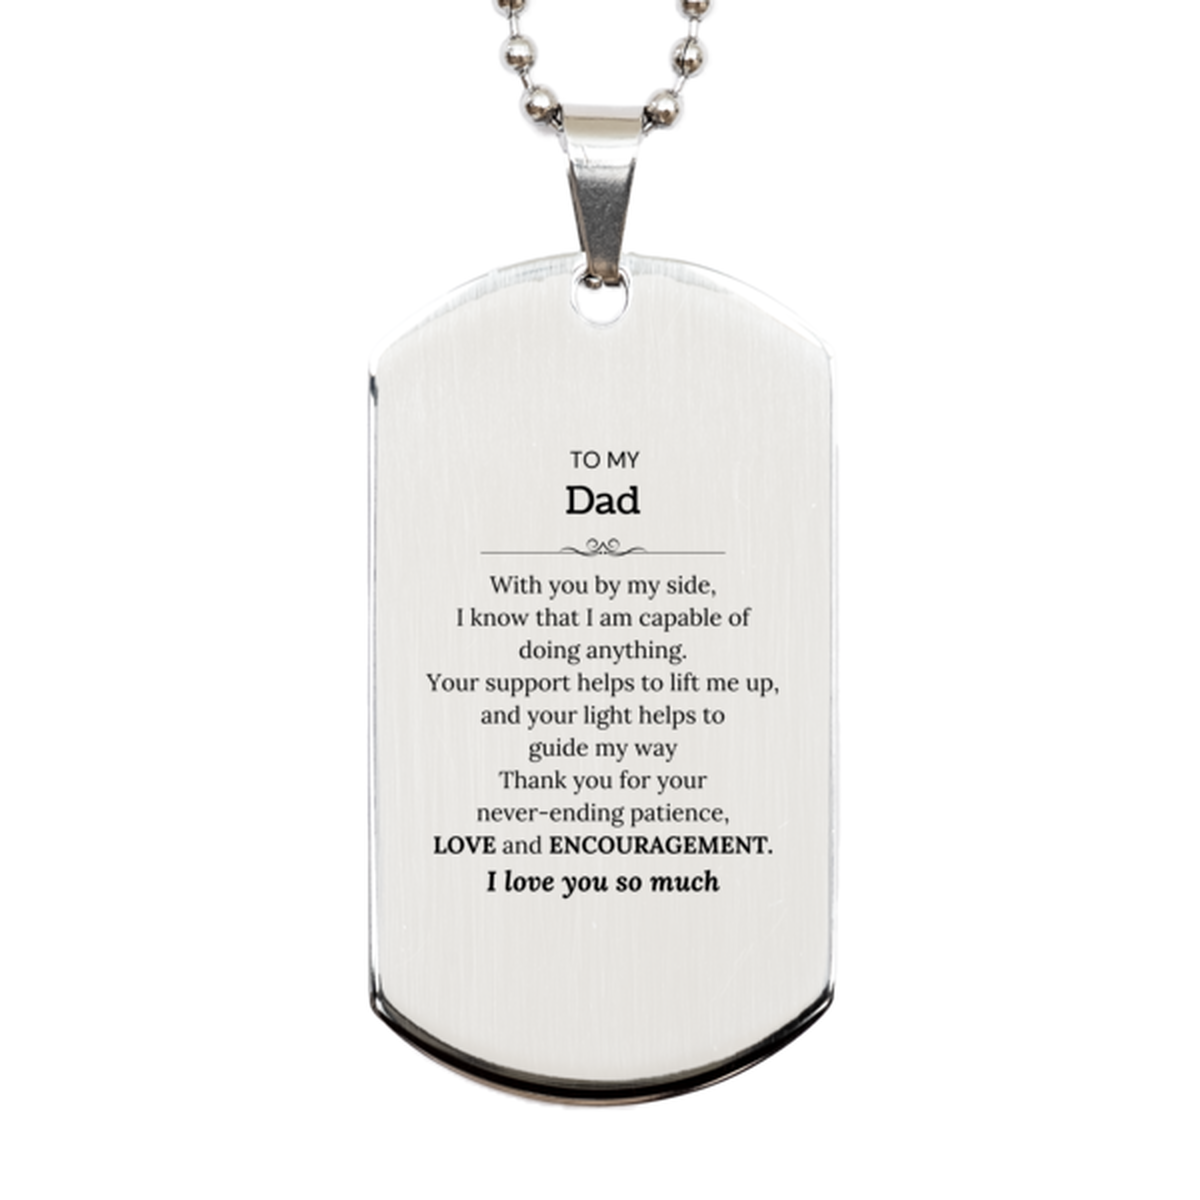 Appreciation Dad Silver Dog Tag Gifts, To My Dad Birthday Christmas Wedding Keepsake Gifts for Dad With you by my side, I know that I am capable of doing anything. I love you so much